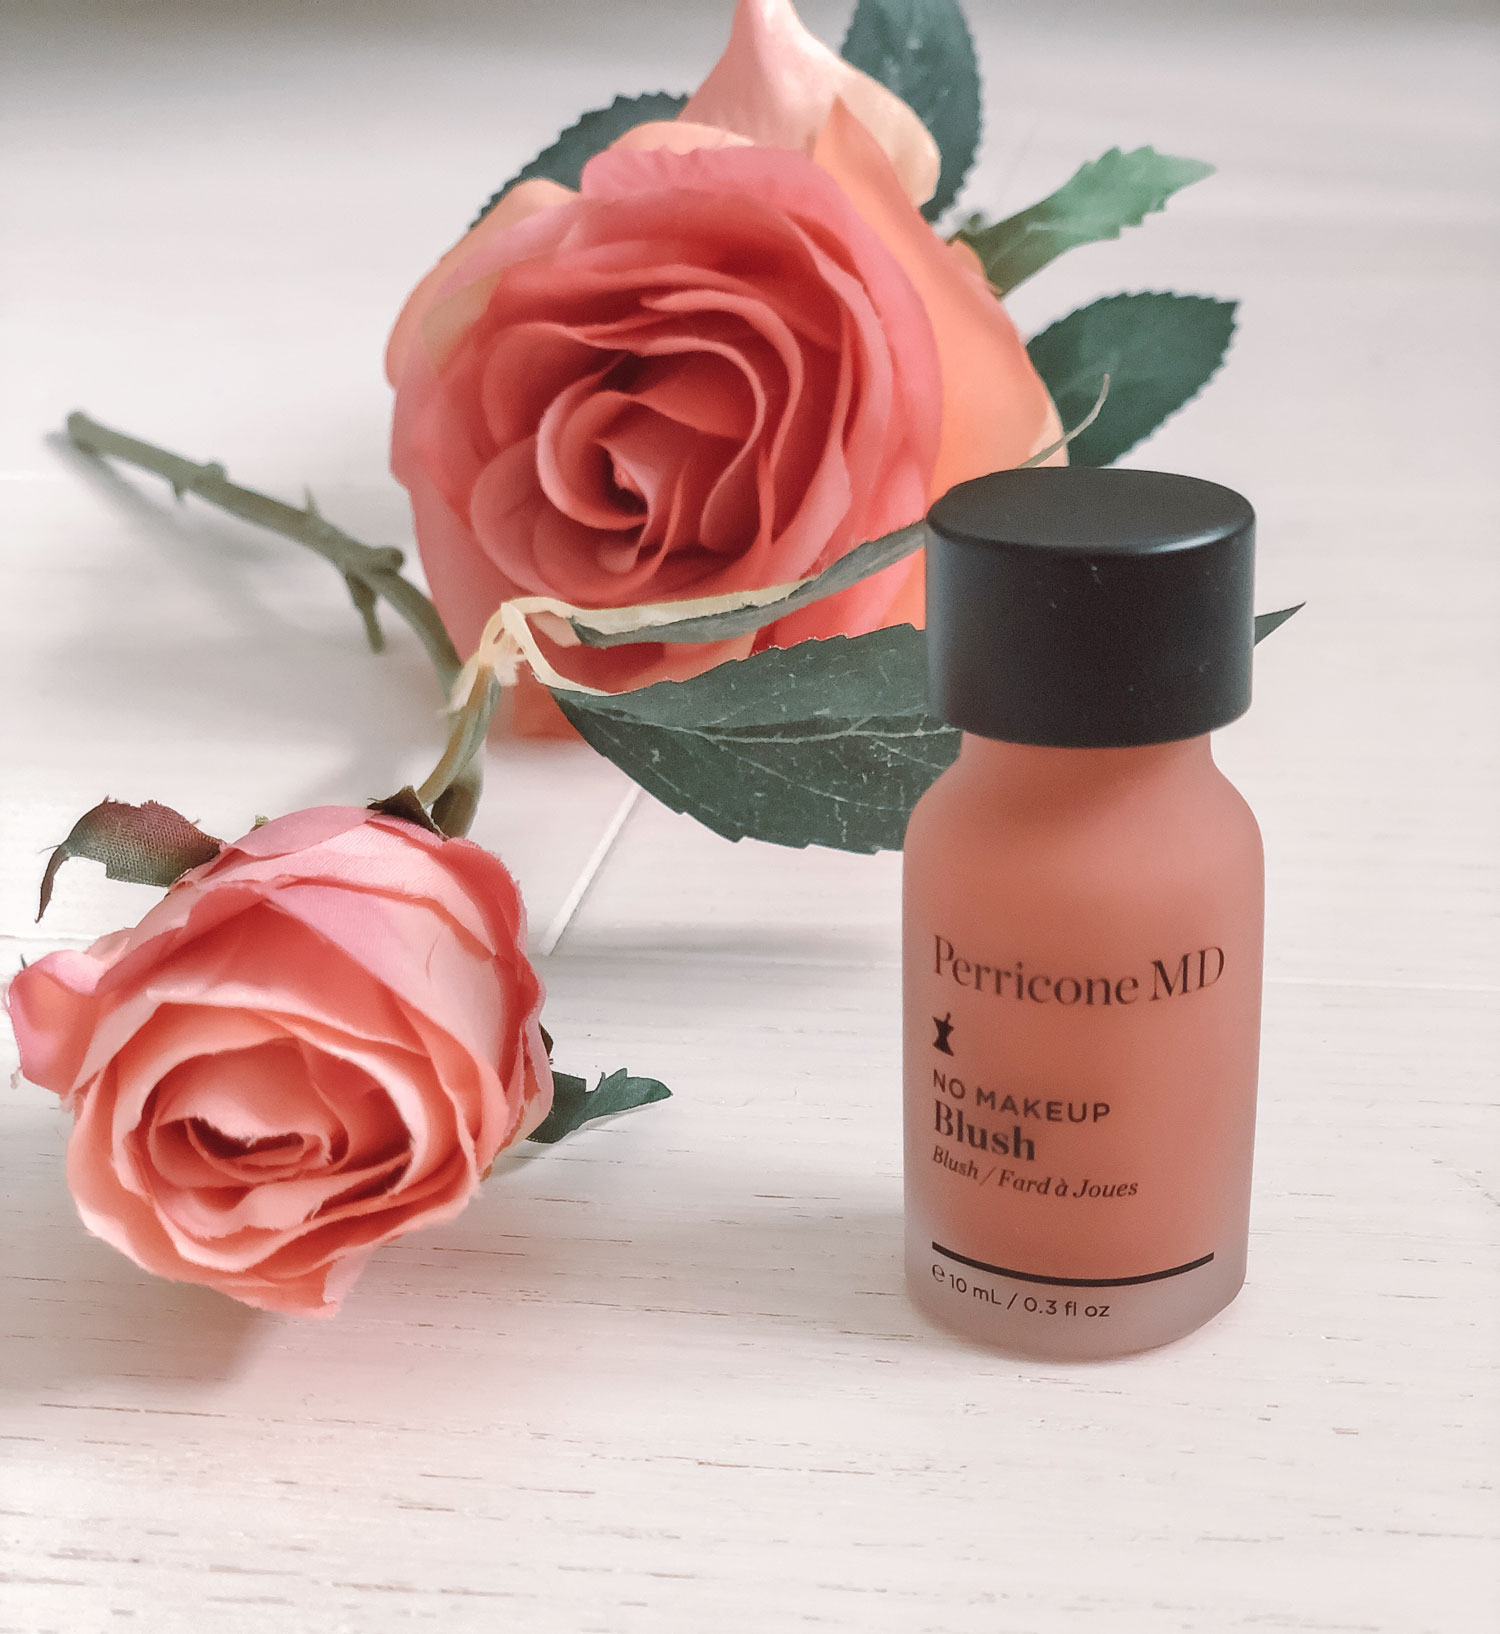 Perricone MD No Makeup Blush: review